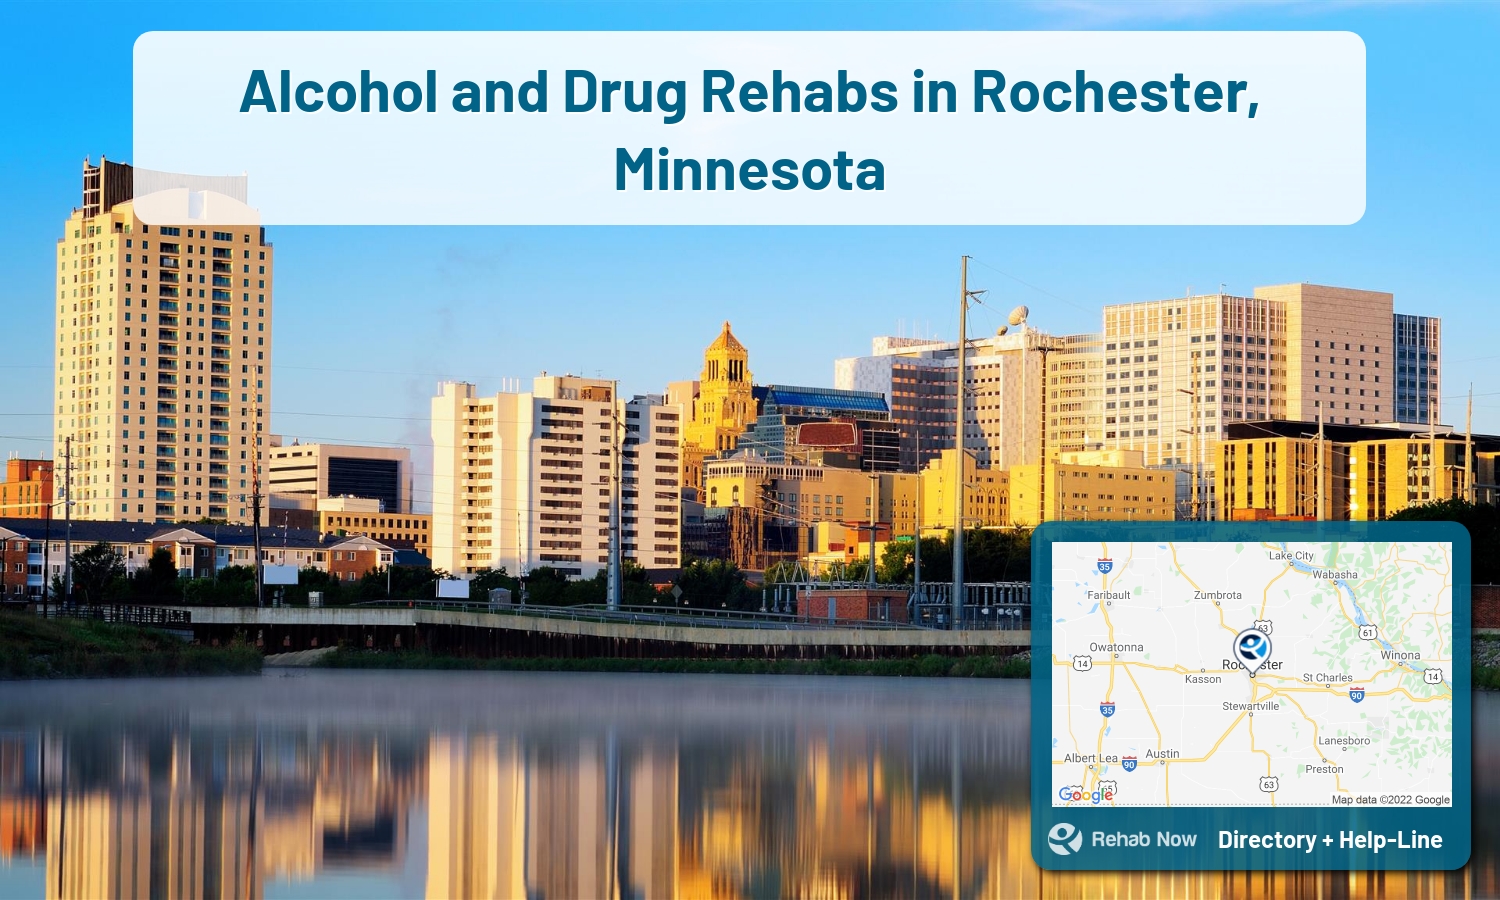 Rochester, MN Treatment Centers. Find drug rehab in Rochester, Minnesota, or detox and treatment programs. Get the right help now!